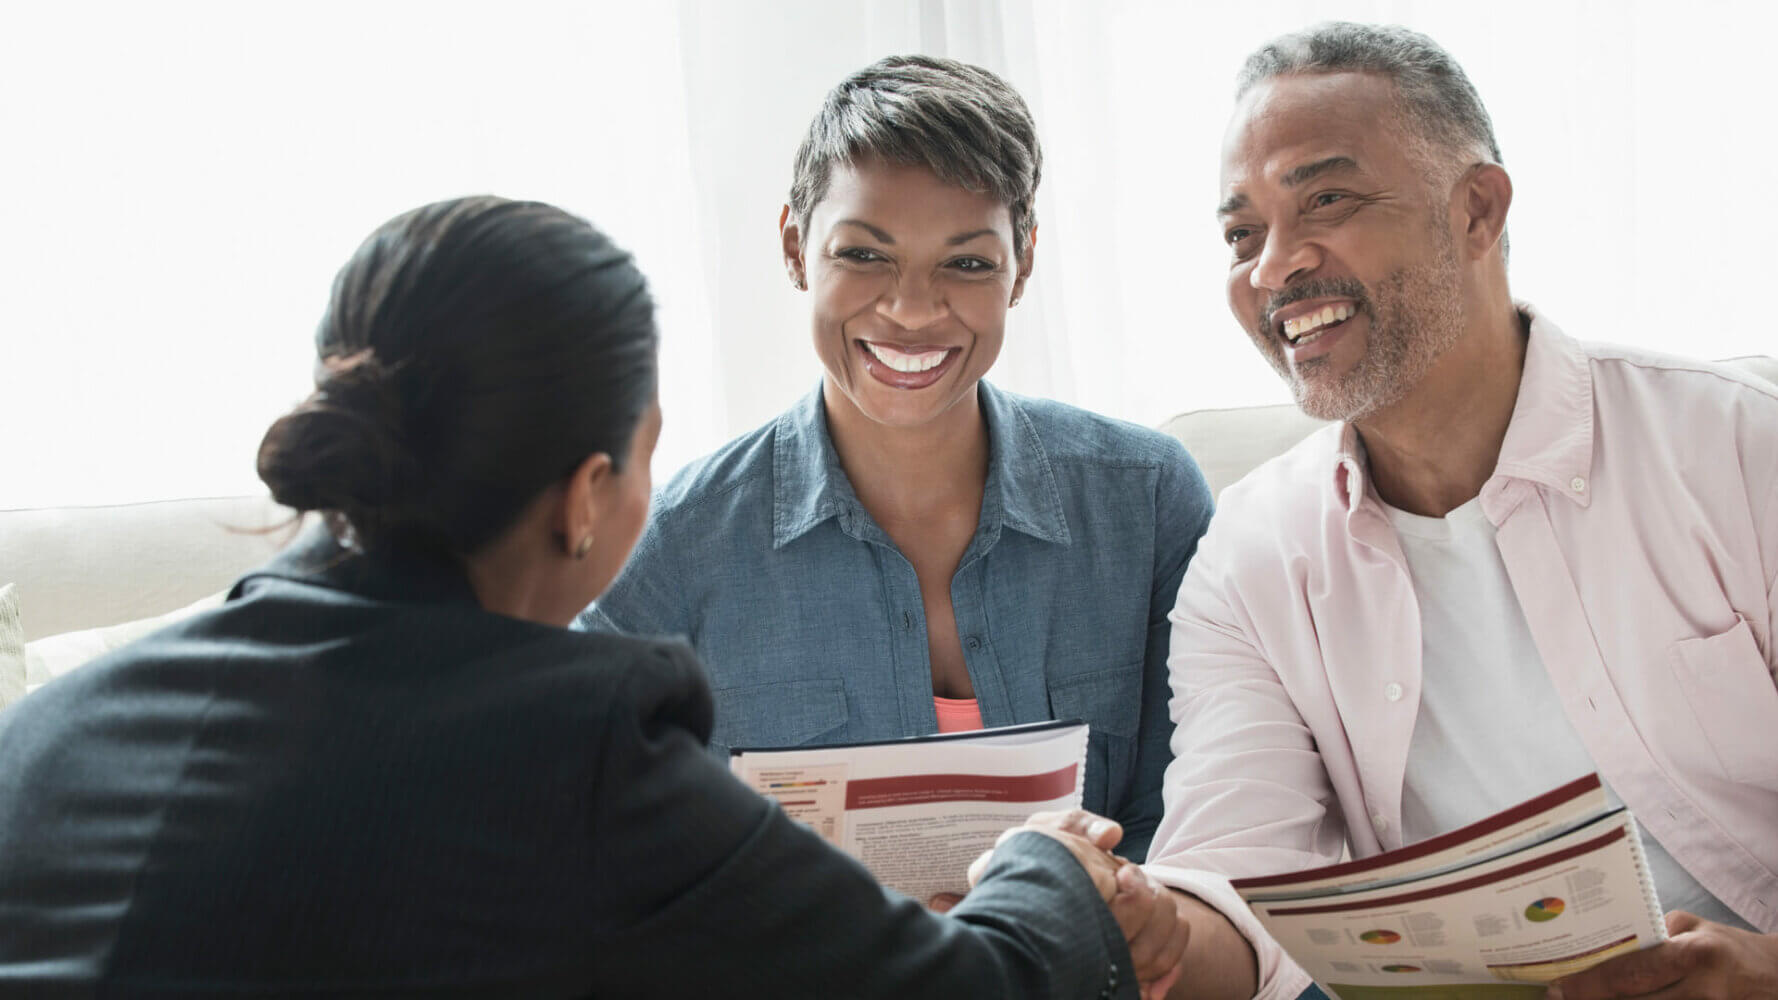 An advisor meets with two clients, advising them during a life transition.